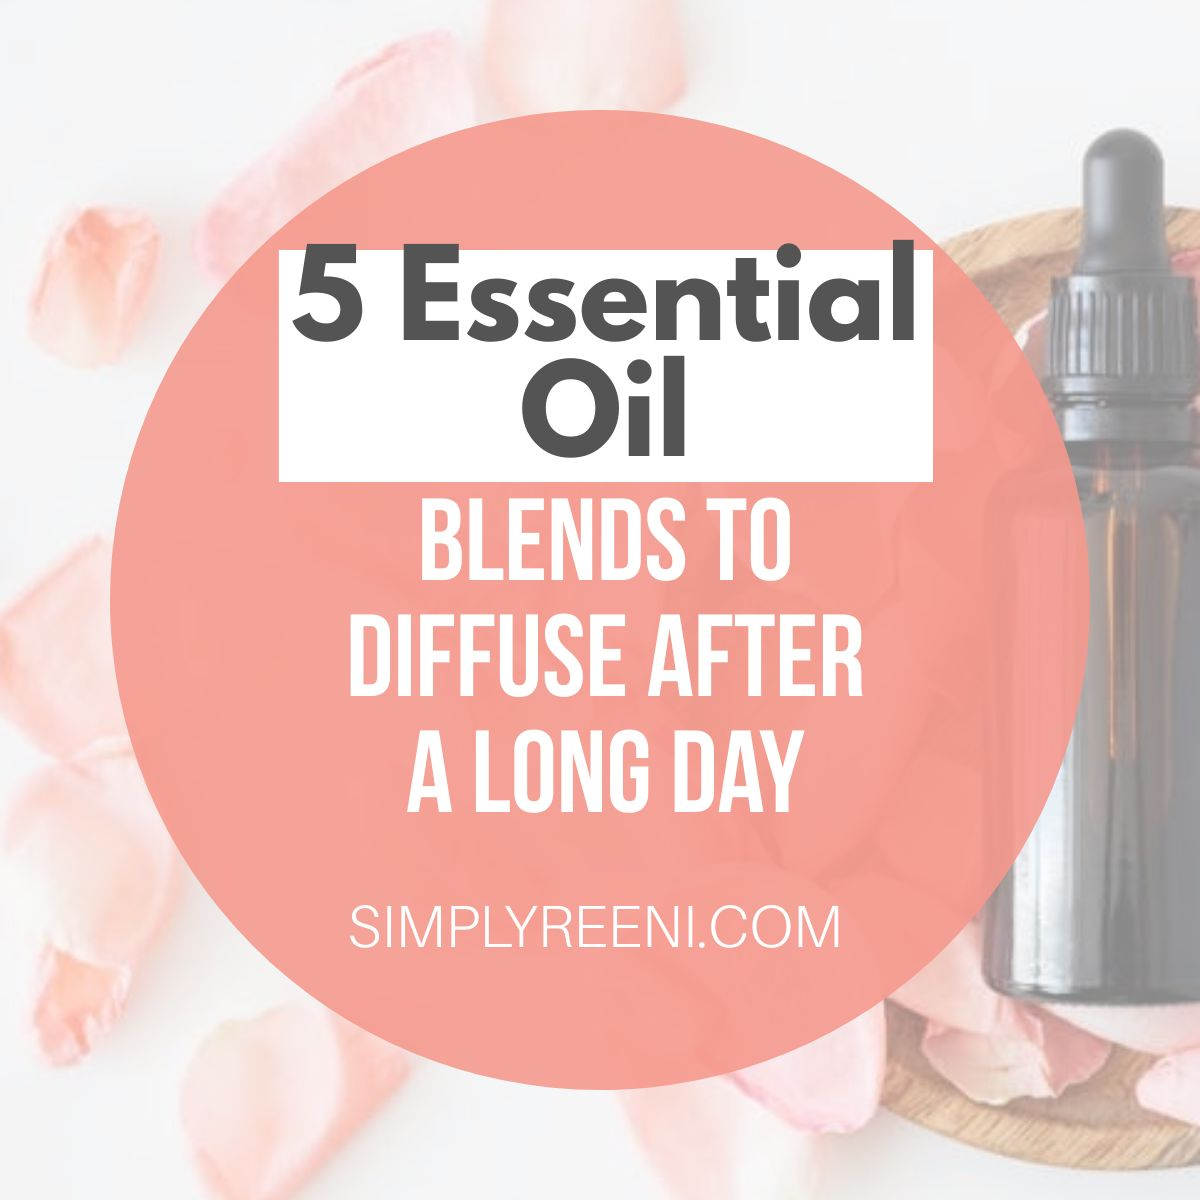 5 Essential Oil Blends to Diffuse After a Long Day